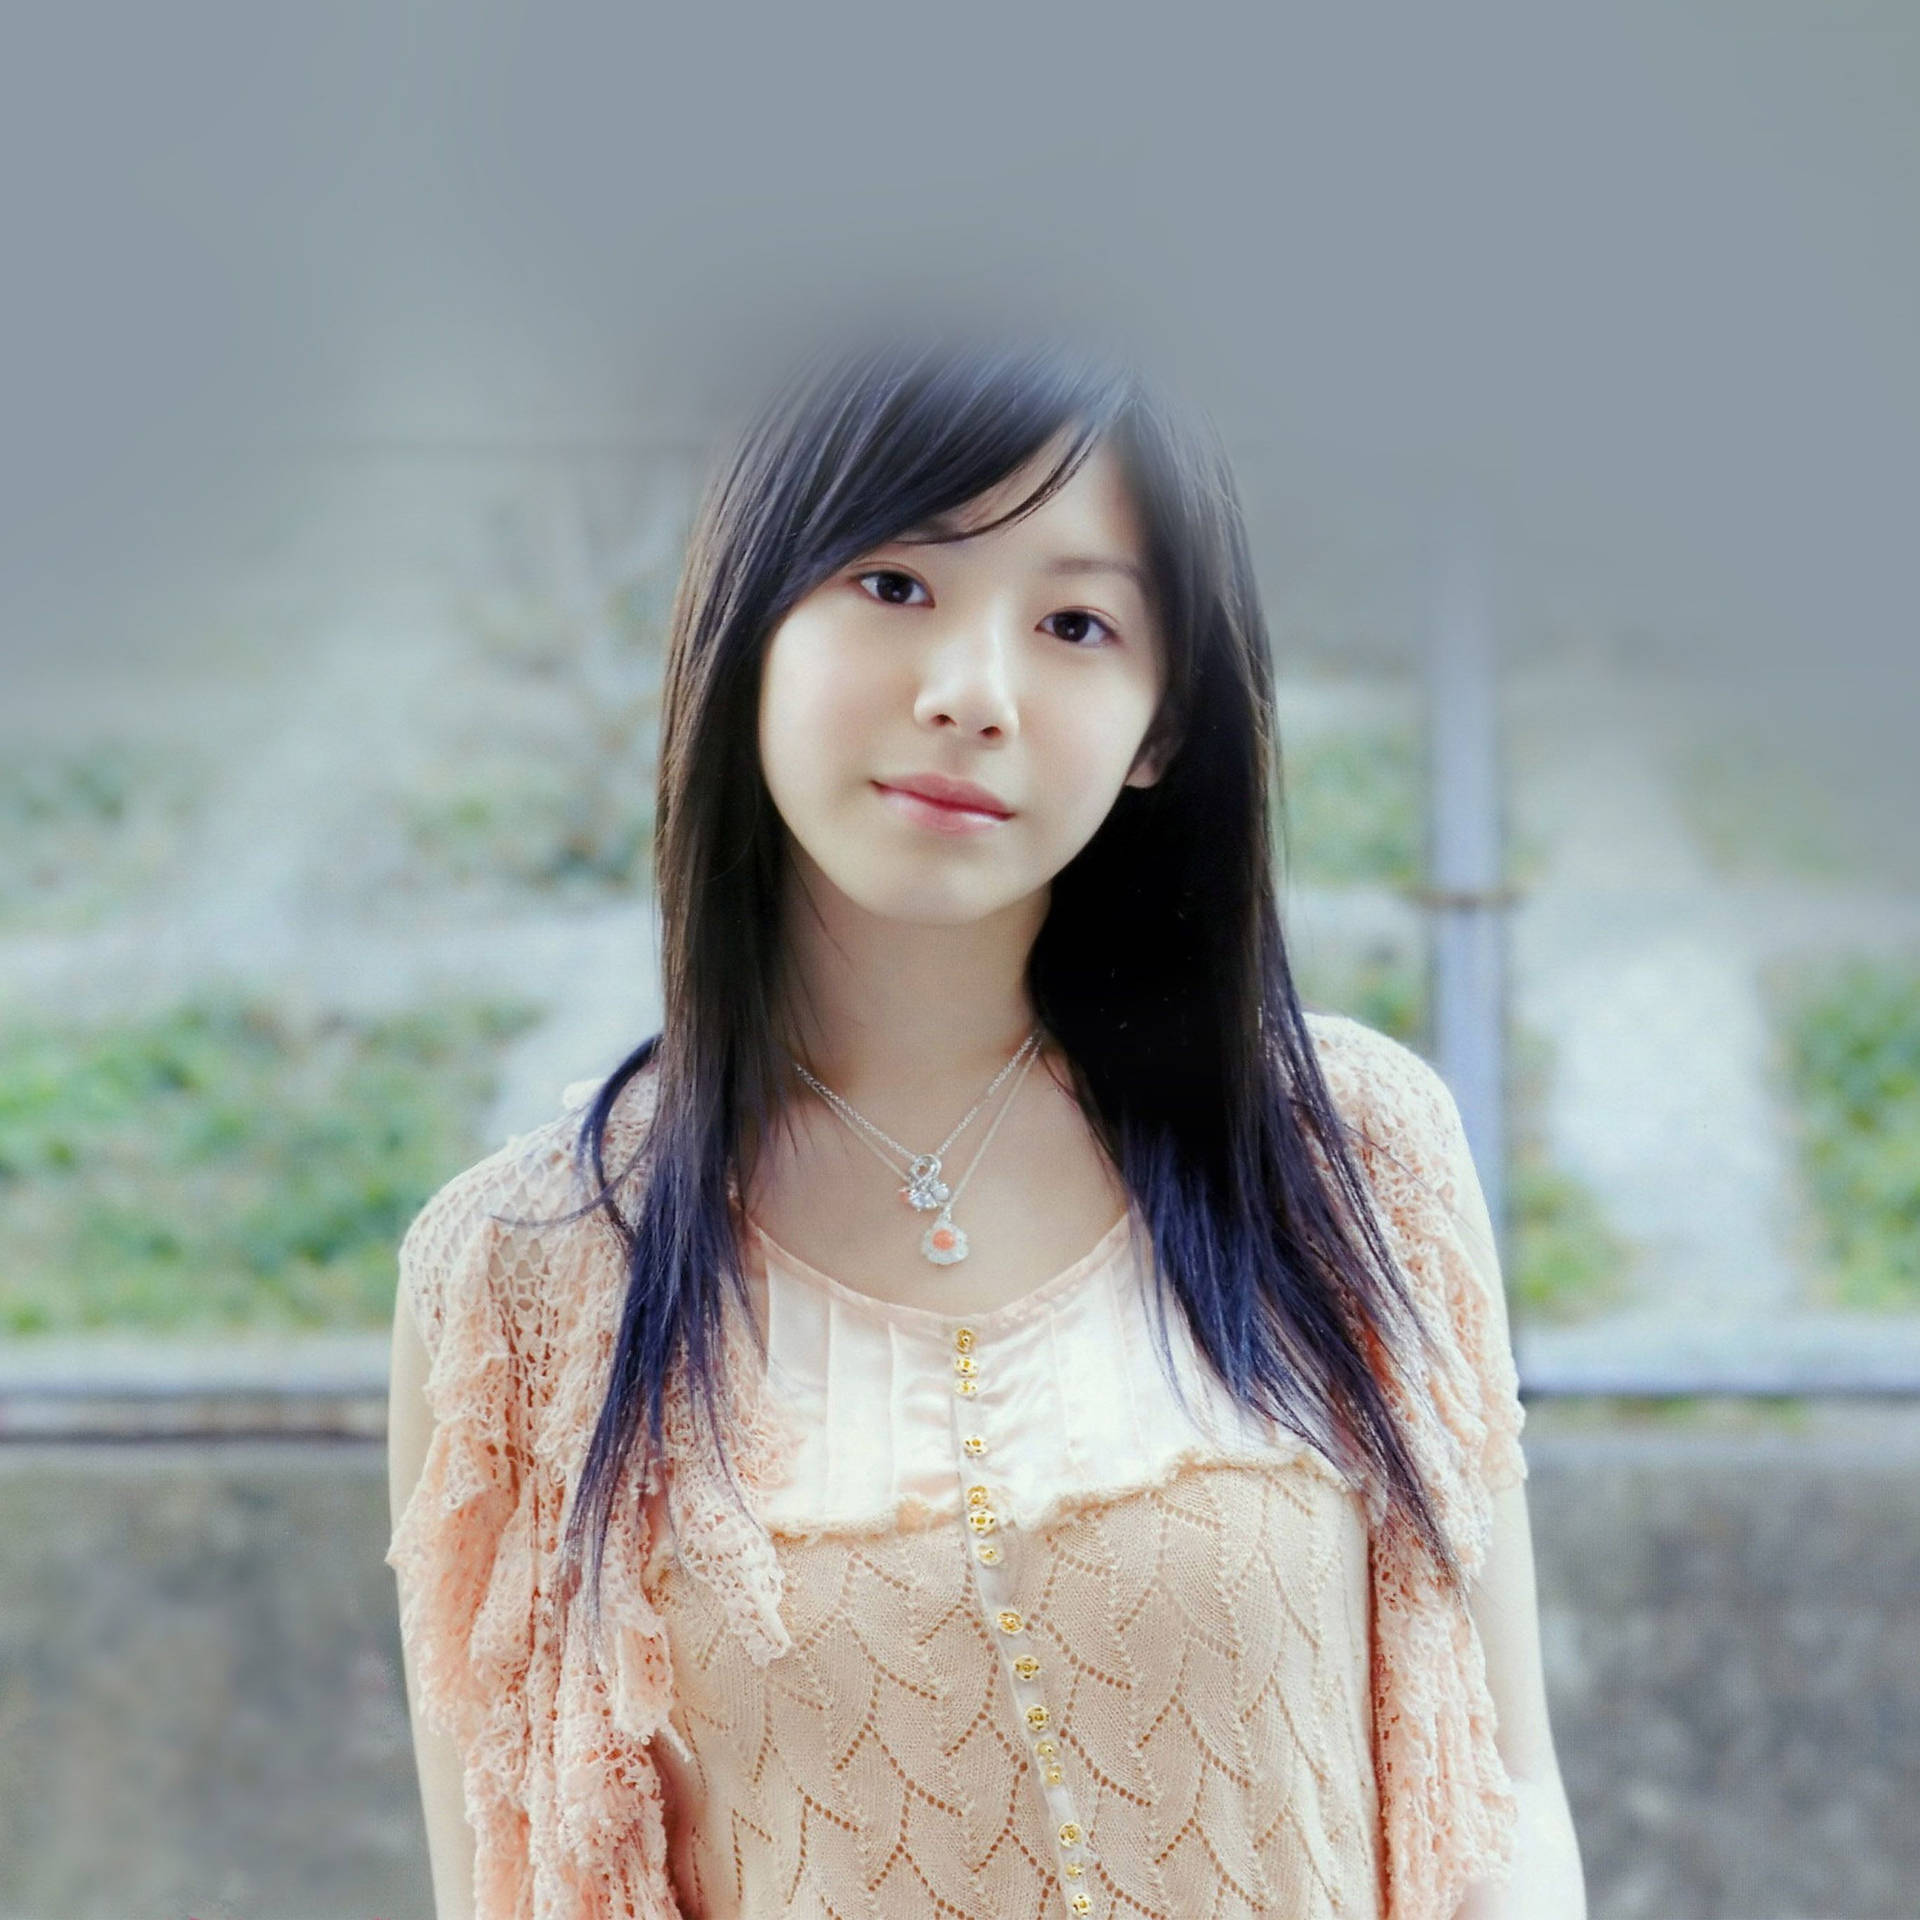 Simple Japanese Girl With Long Hair Background